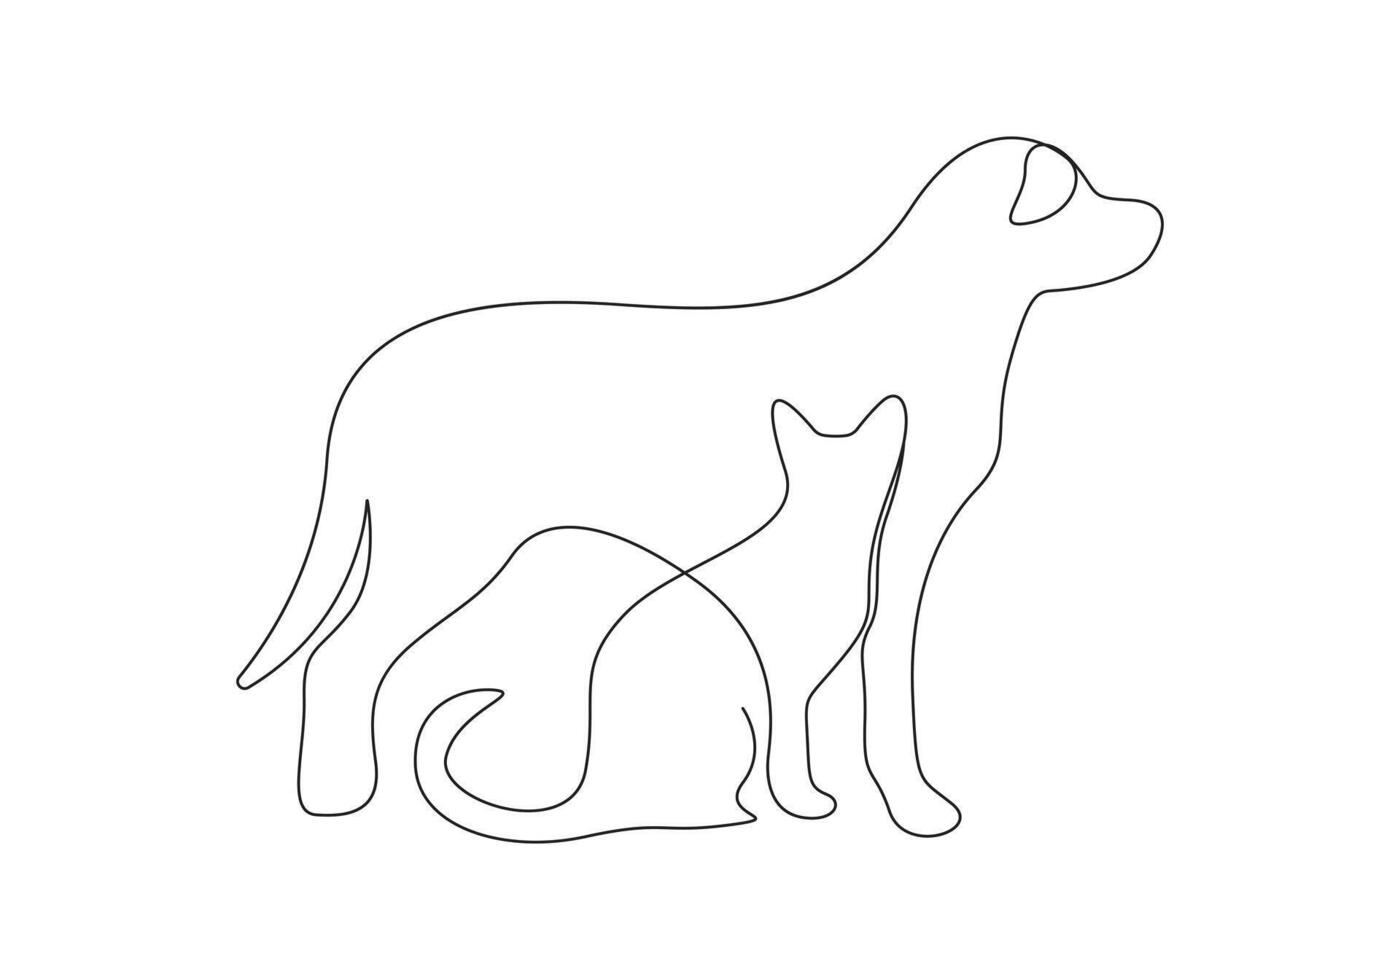 Dog in one continuous line drawing pro illustration vector